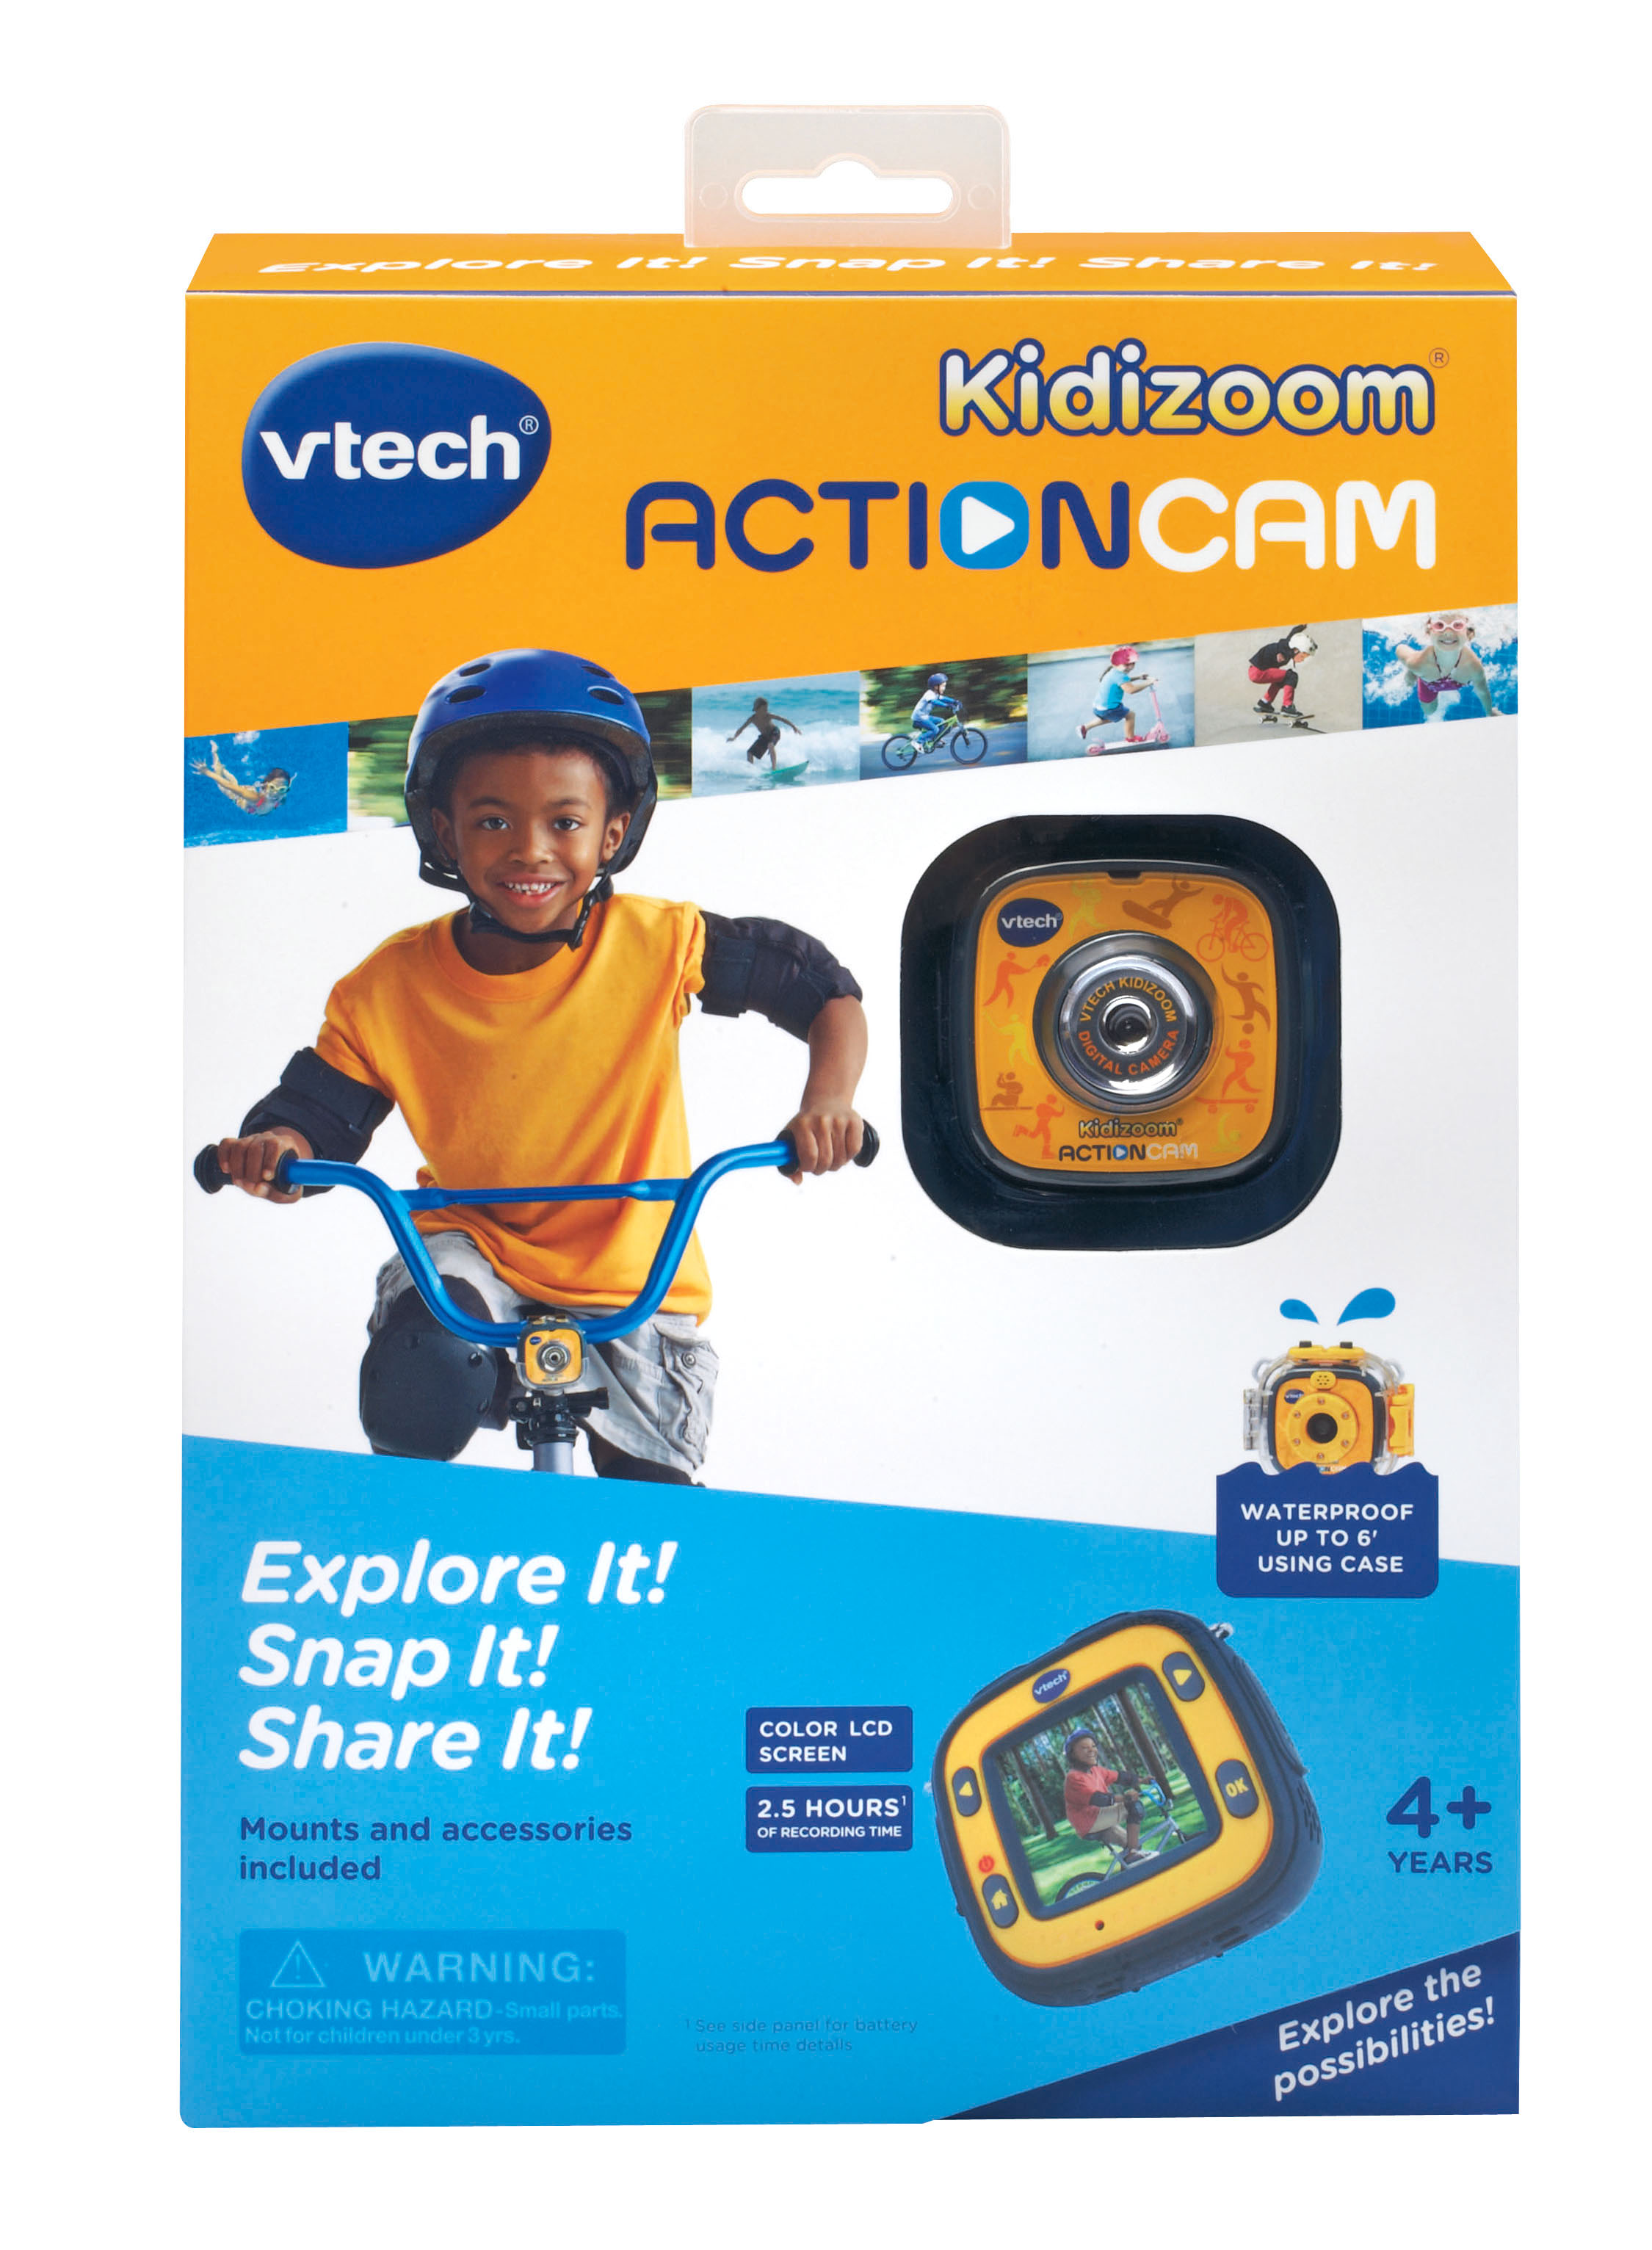 VTech Kidizoom Action Cam (Yellow/Black) - image 3 of 3